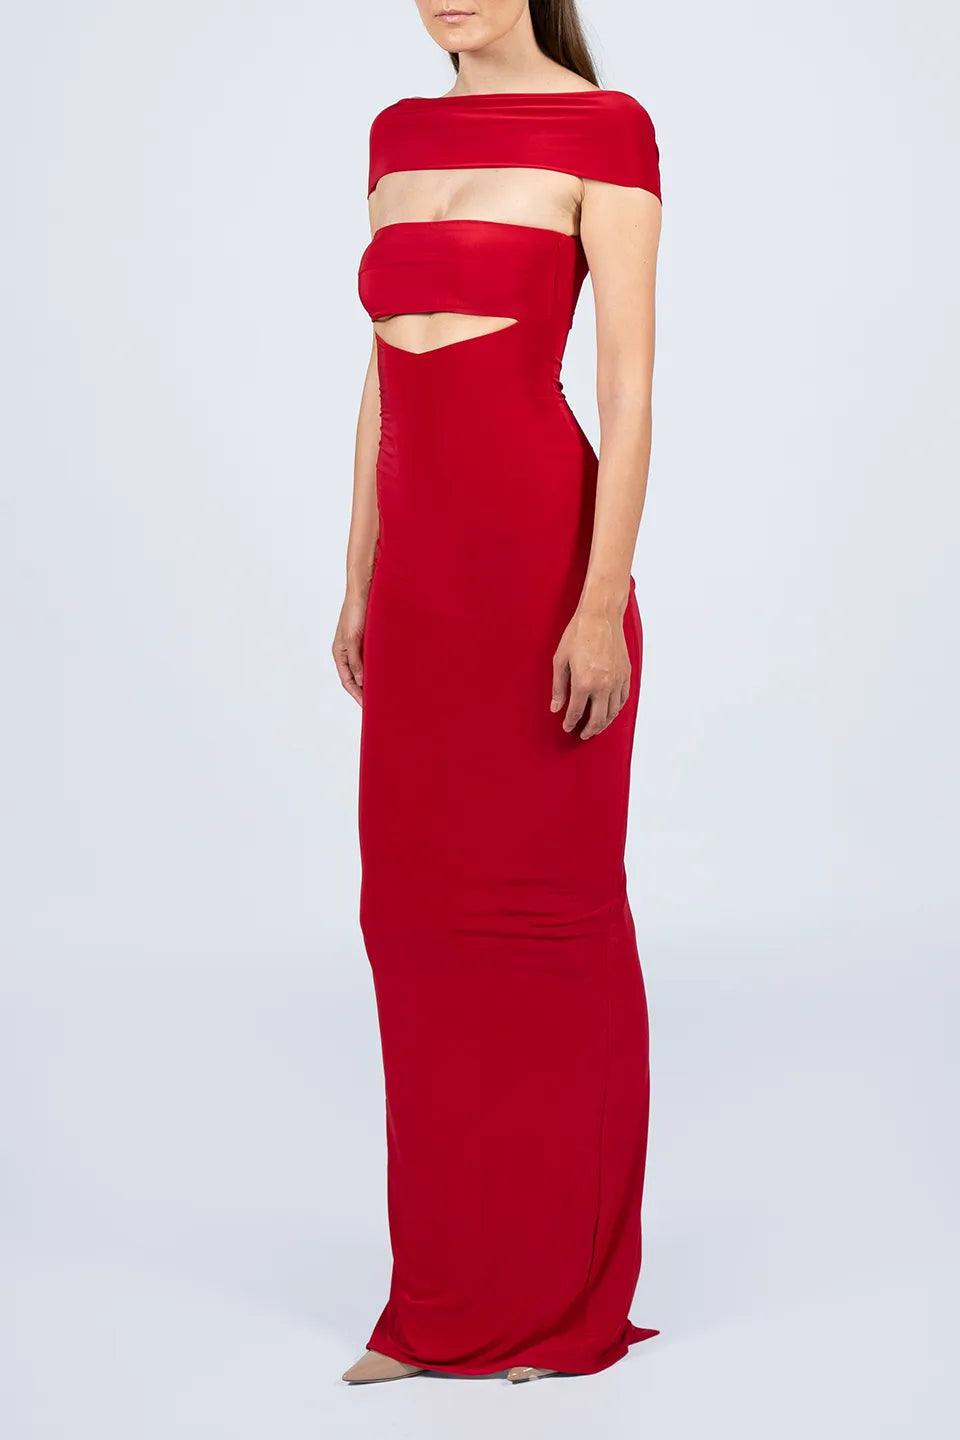 Designer Red Maxi dresses, shop online with free delivery in UAE. Product gallery 2